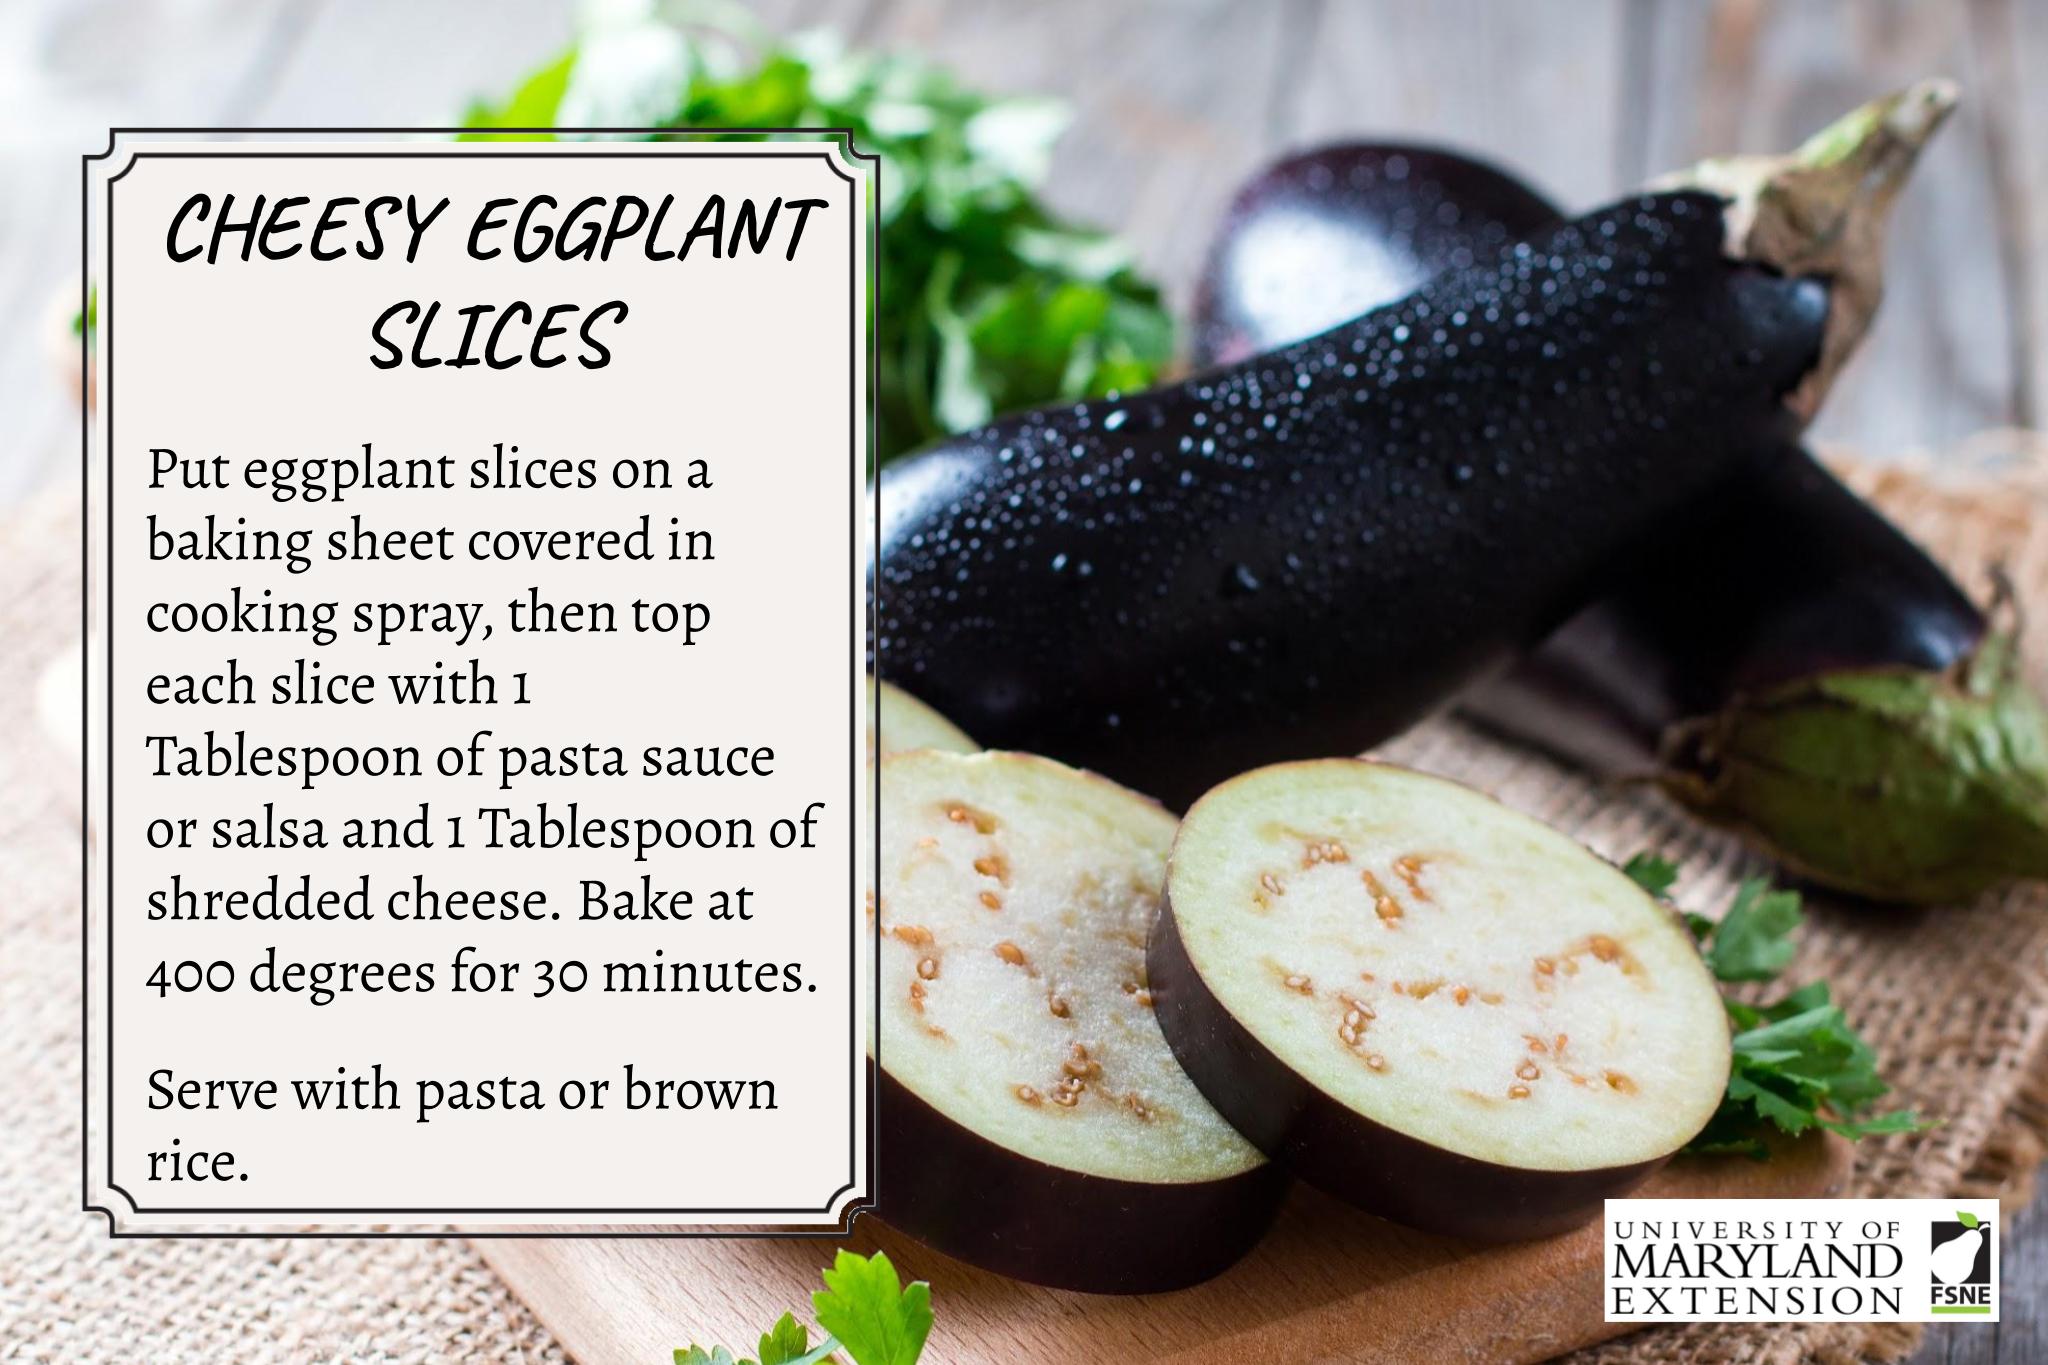 picture of sliced eggplant with recipe for cheesy eggplant